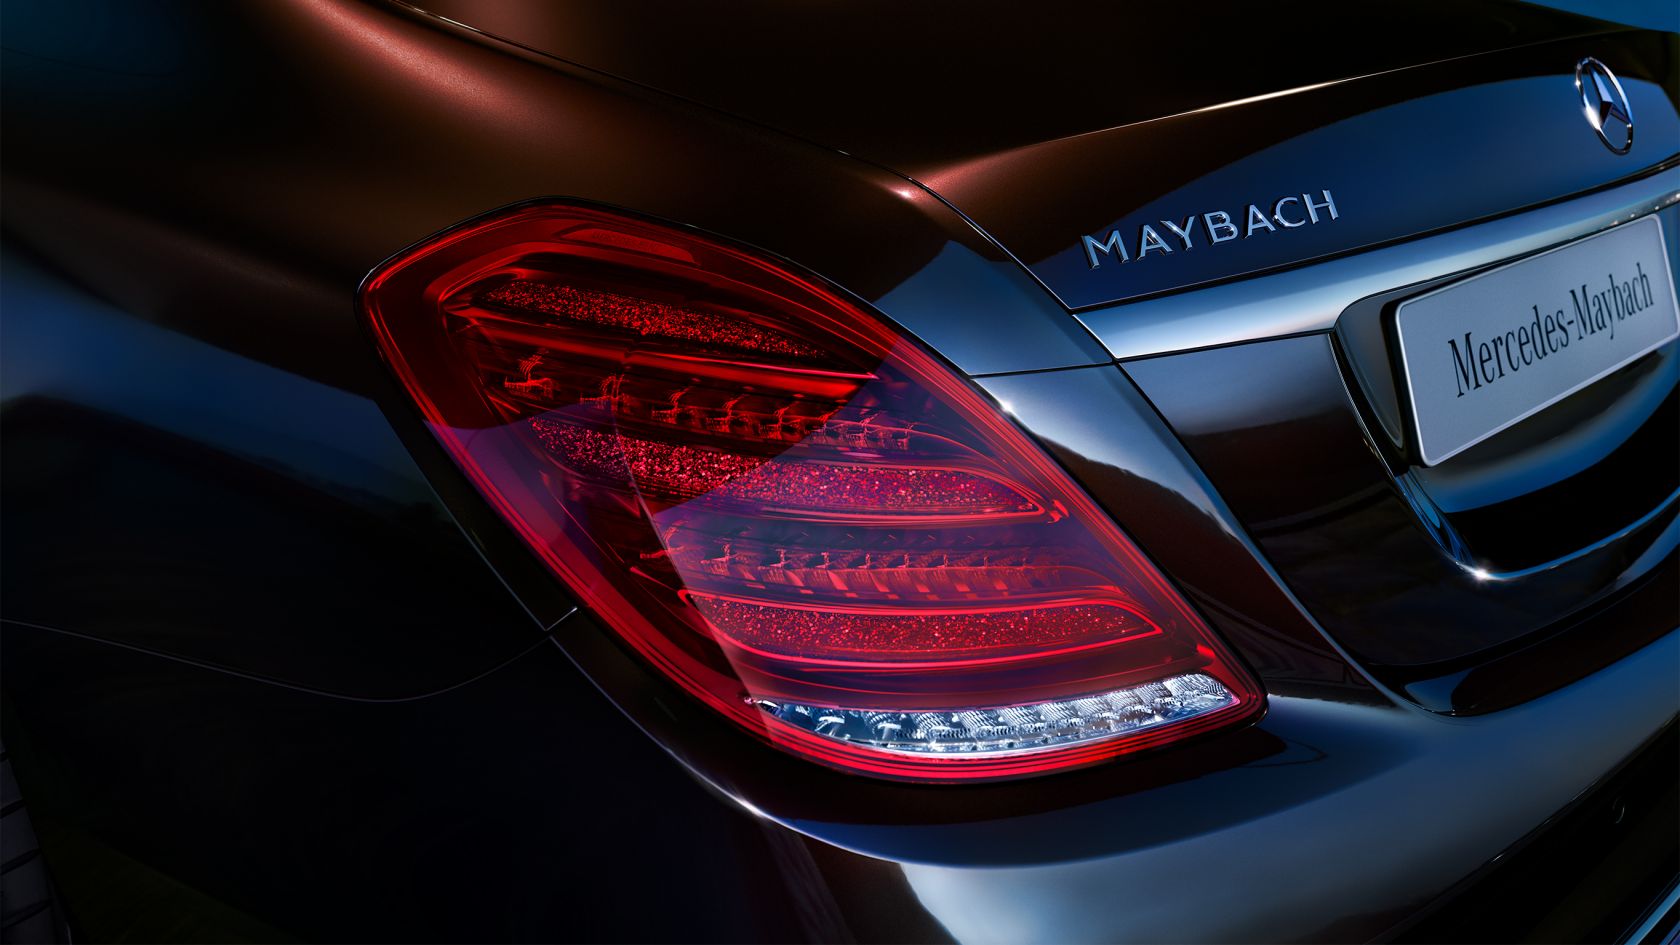 Mercedes Maybach 6 Cabriolet Rear Wallpapers